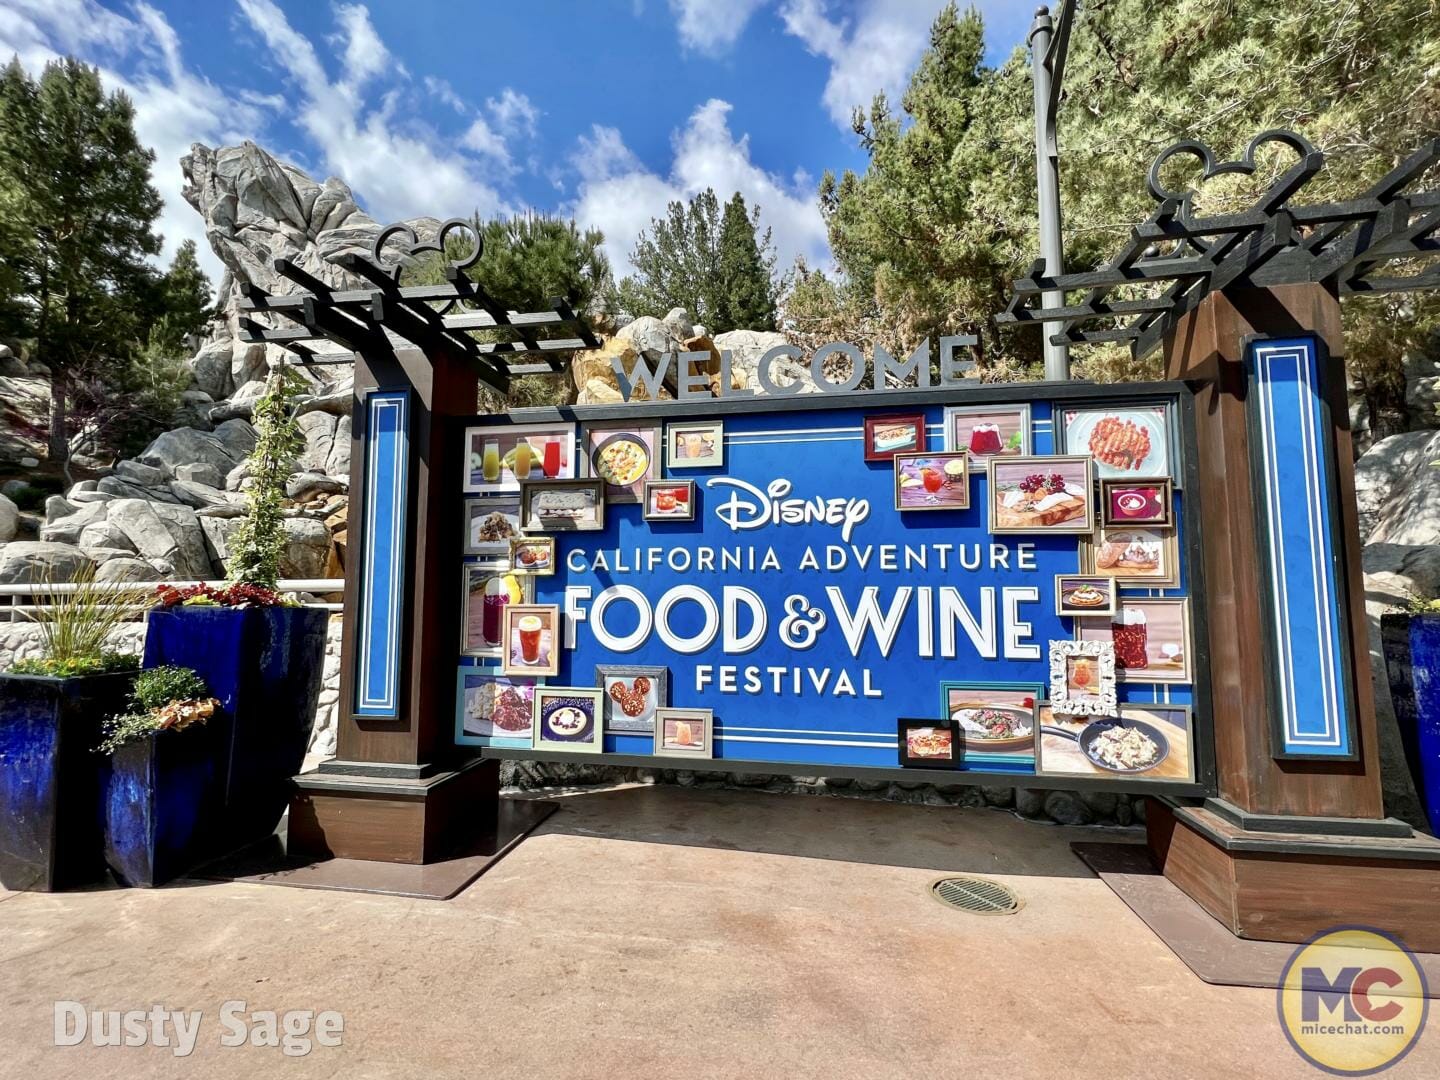 Disneyland Food and Wine Festival Entry Sign - MiceChat